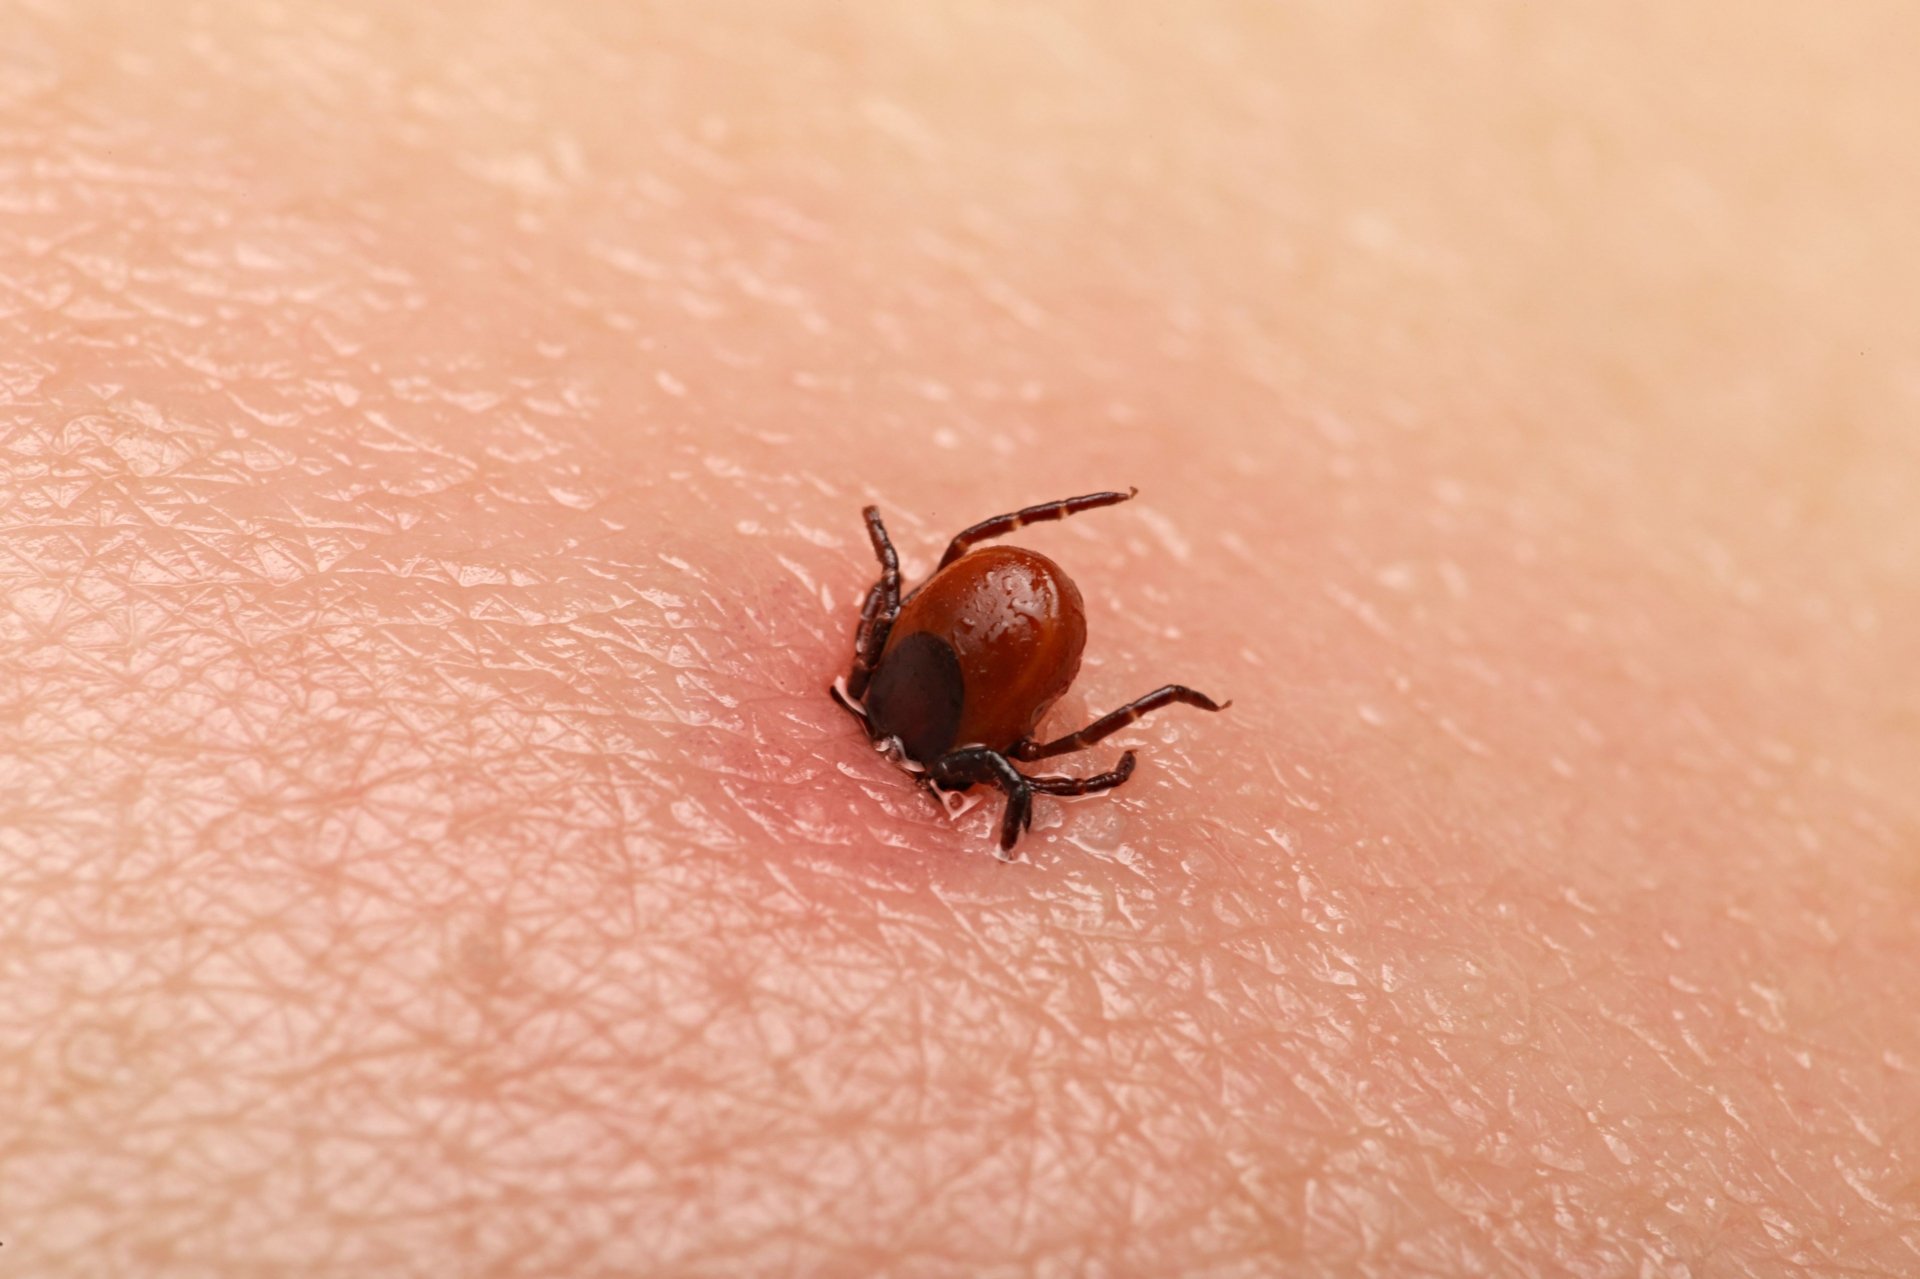 Ticks transmit diseases to humans and animals, including Lyme Disease and Rocky Mountain spotted fever. Image Credit: Getty